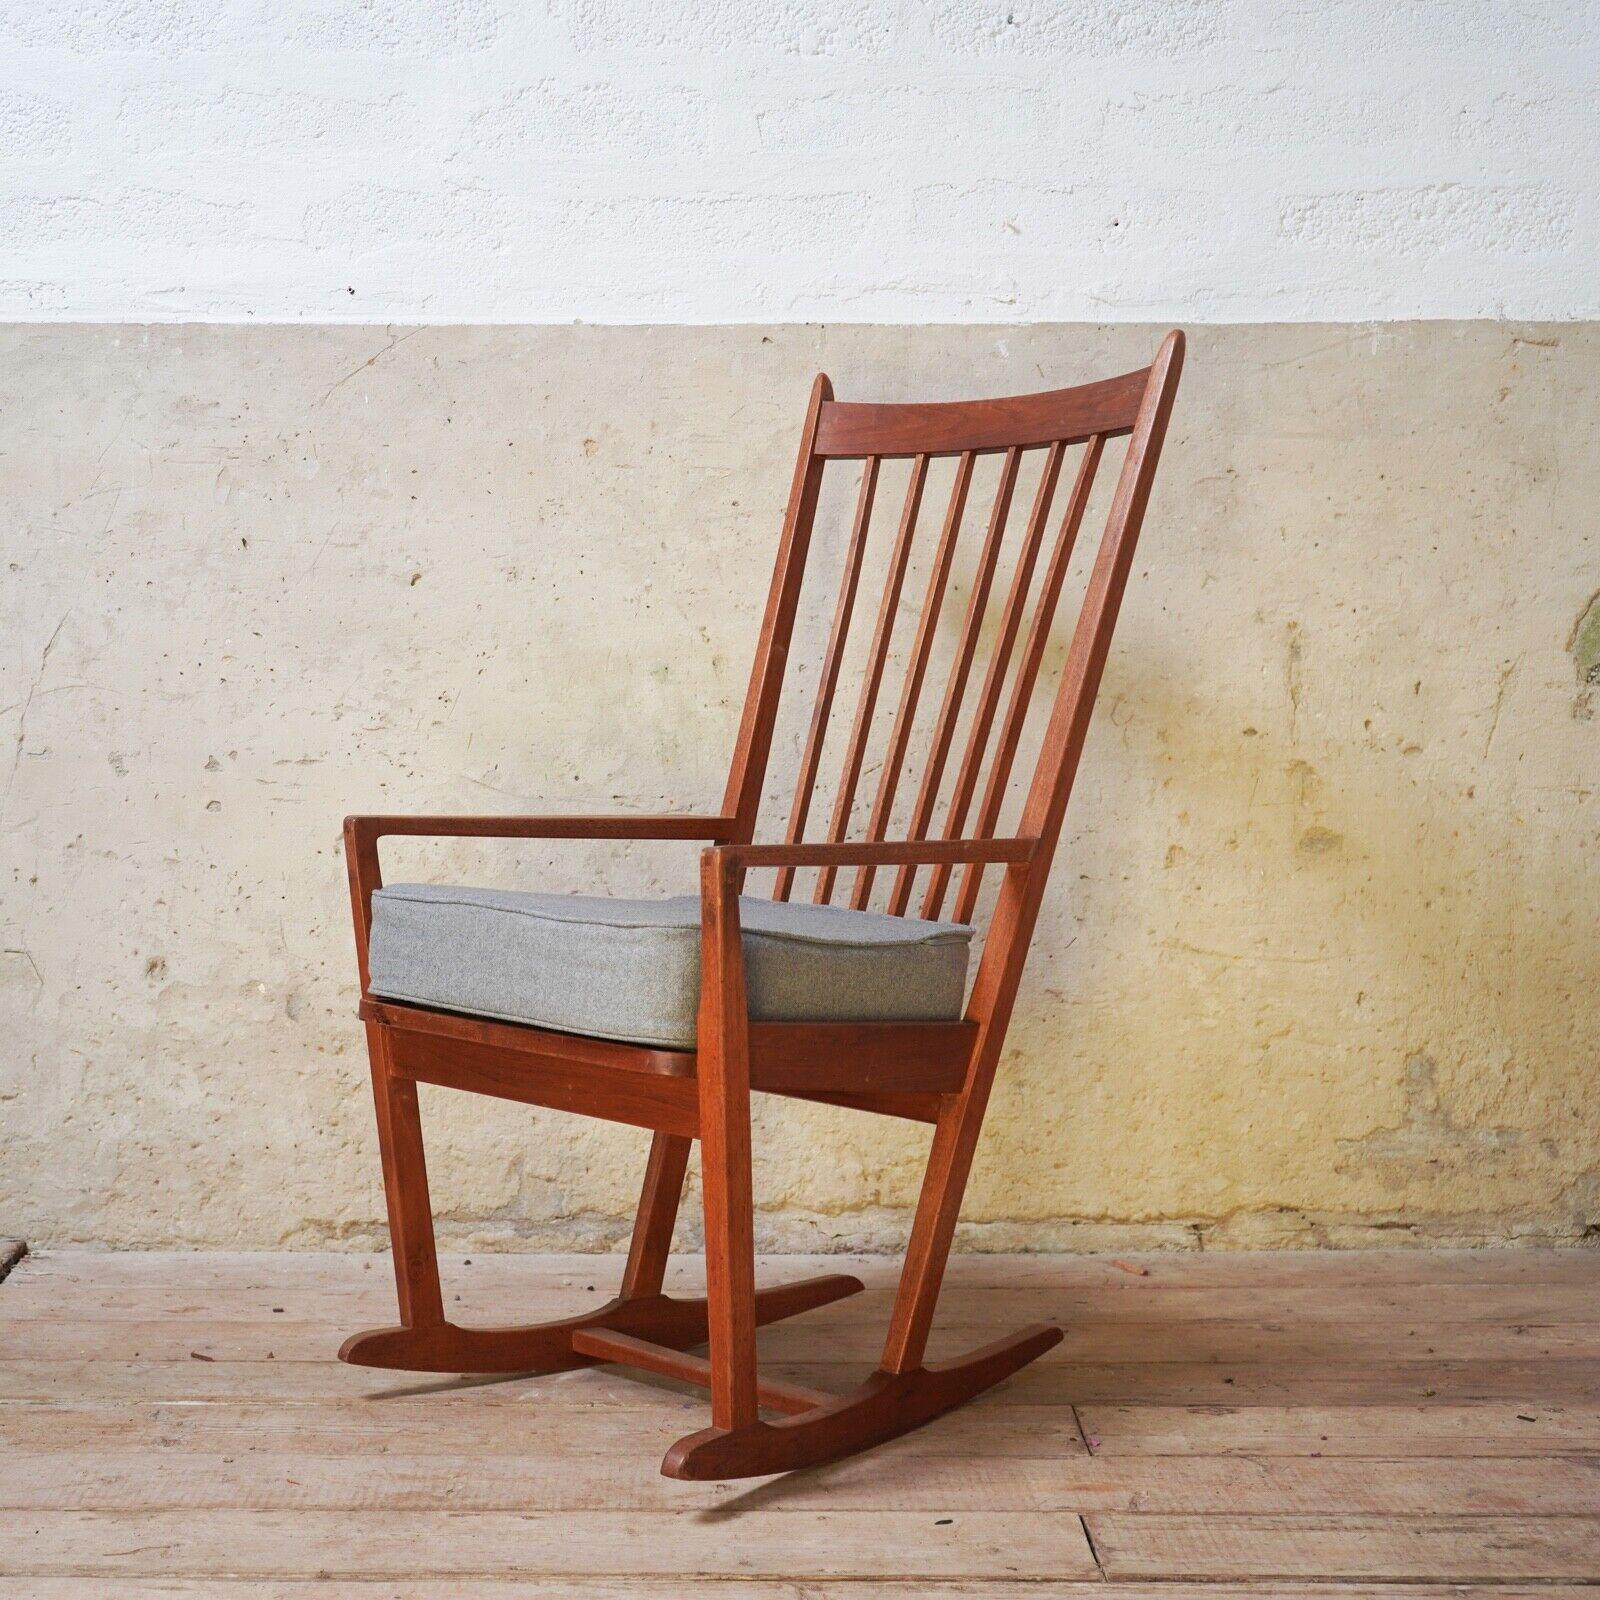 Robin Nance Teak Midcentury Rocking Chair 1960s In Good Condition For Sale In Dorchester, GB